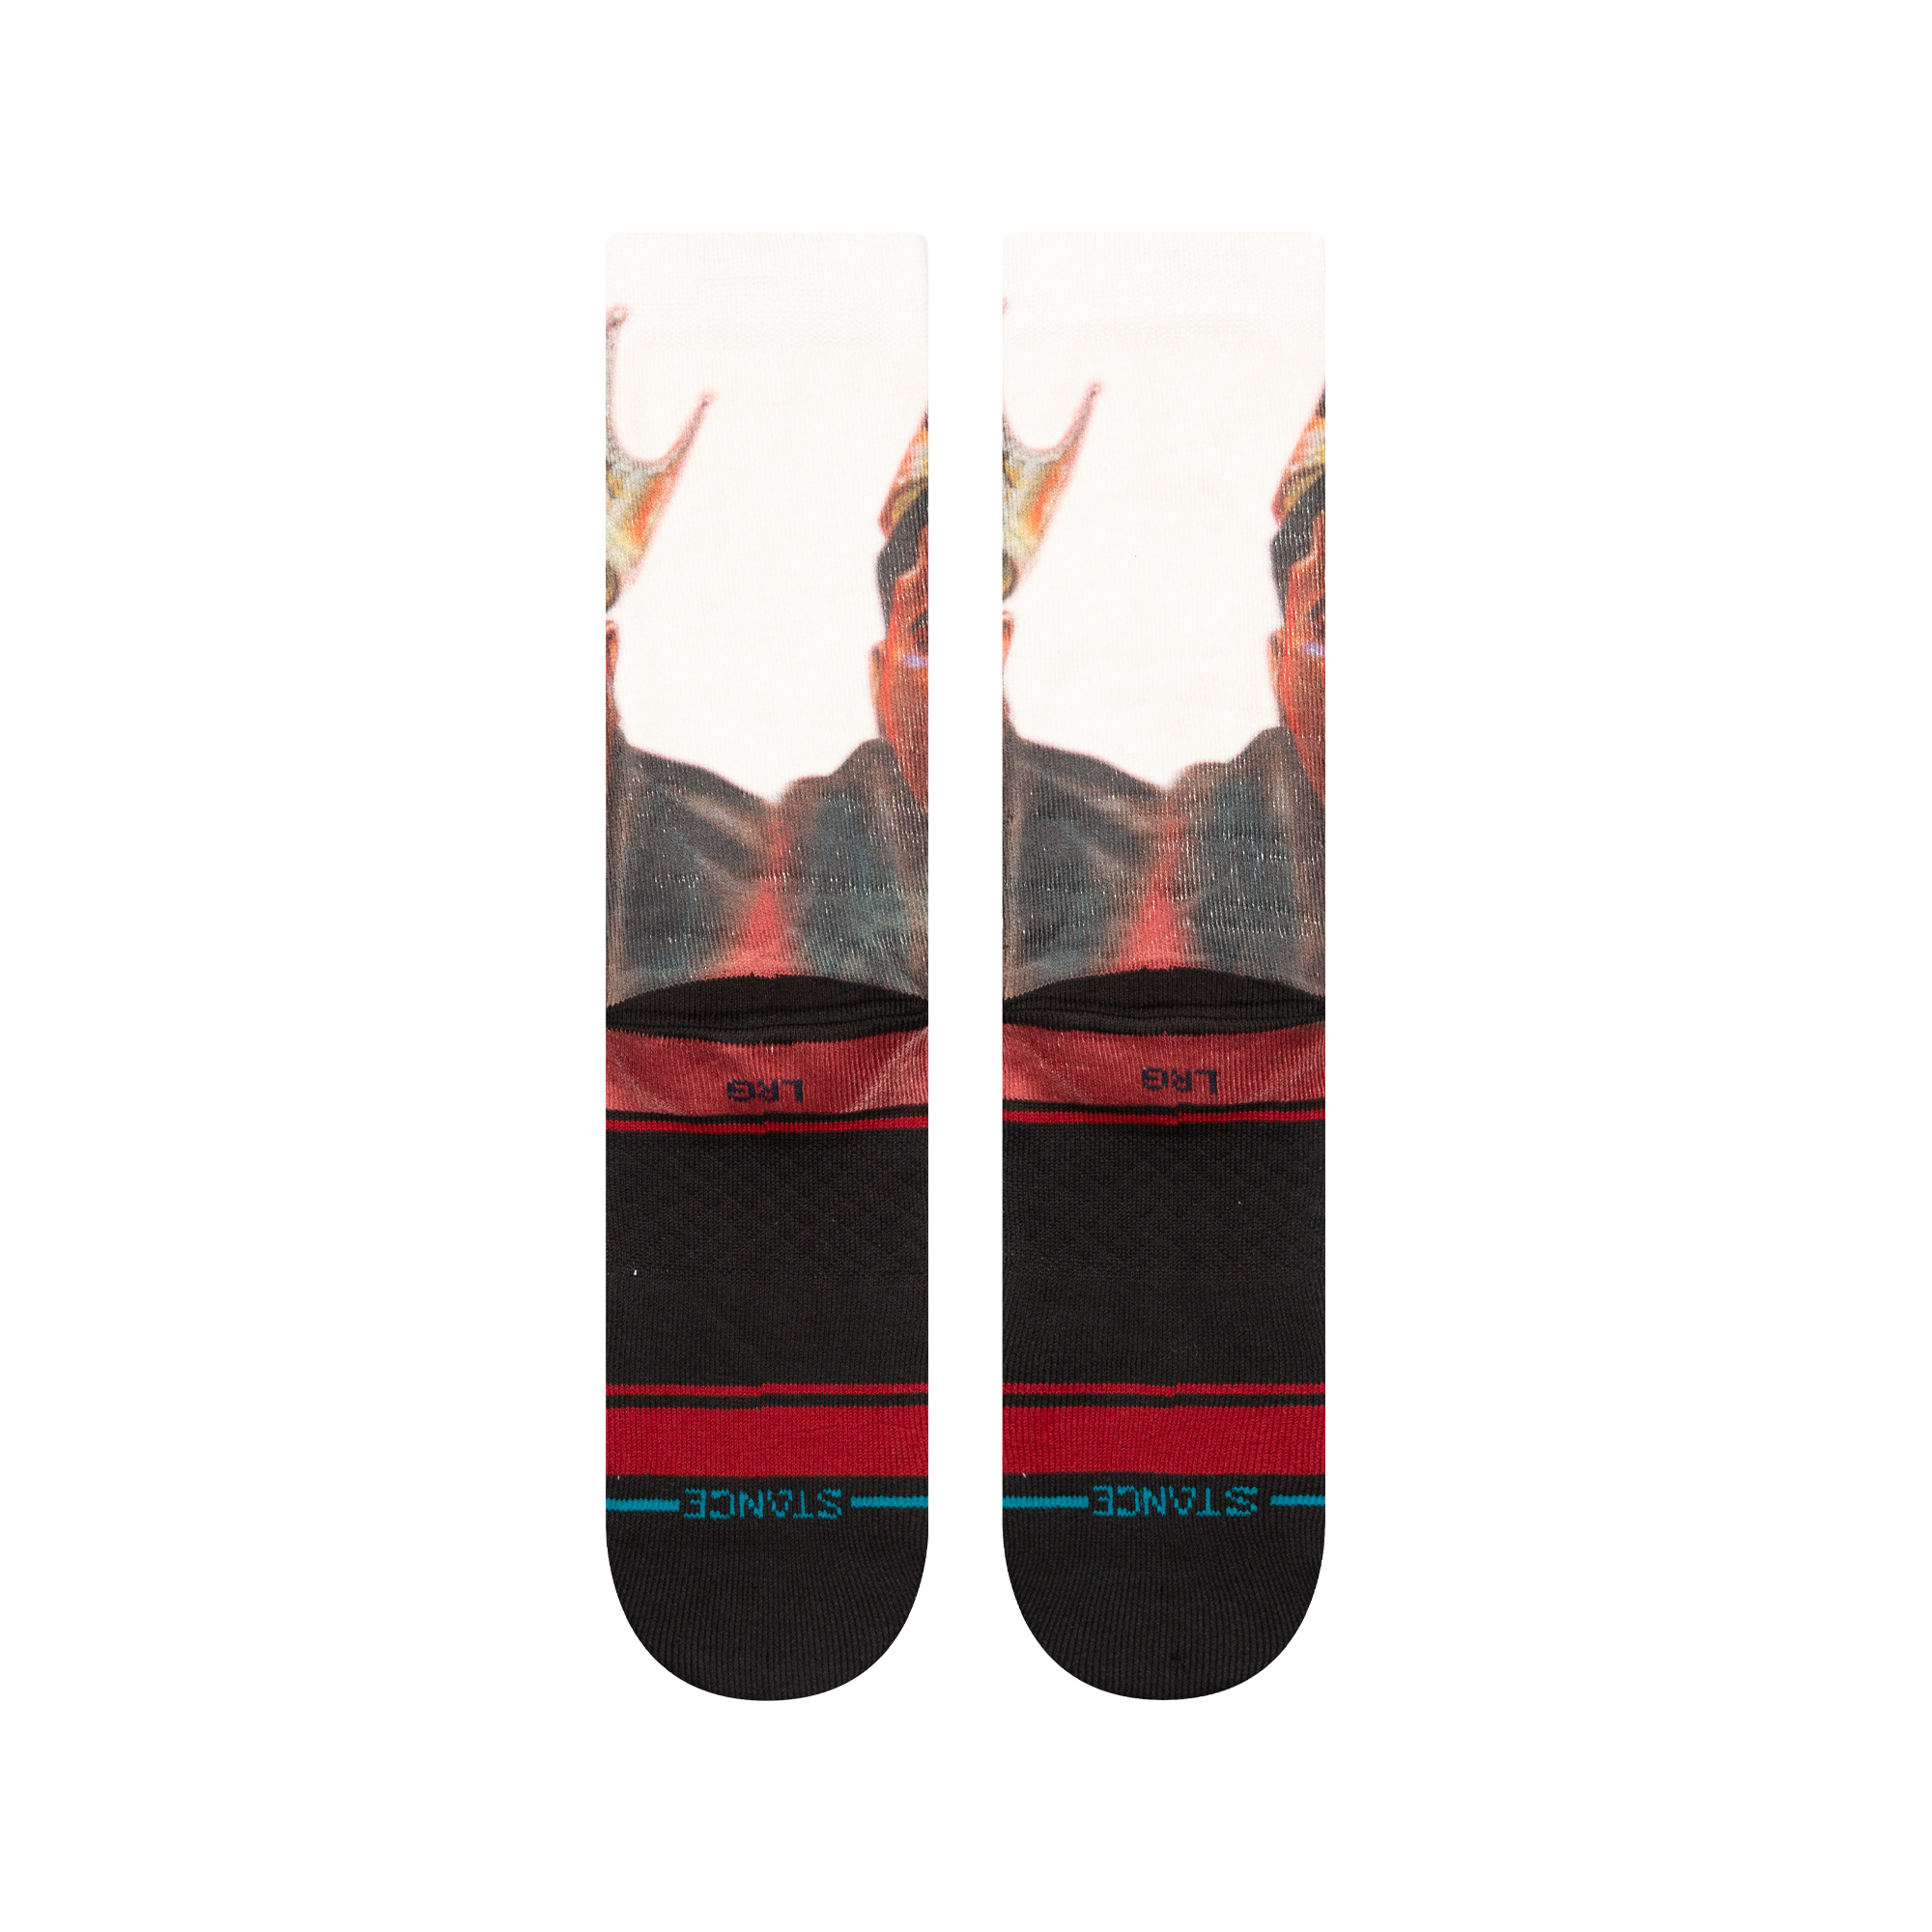 Notorious B.I.G. X Stance Skys The Limit Poly Crew Socks | Stance